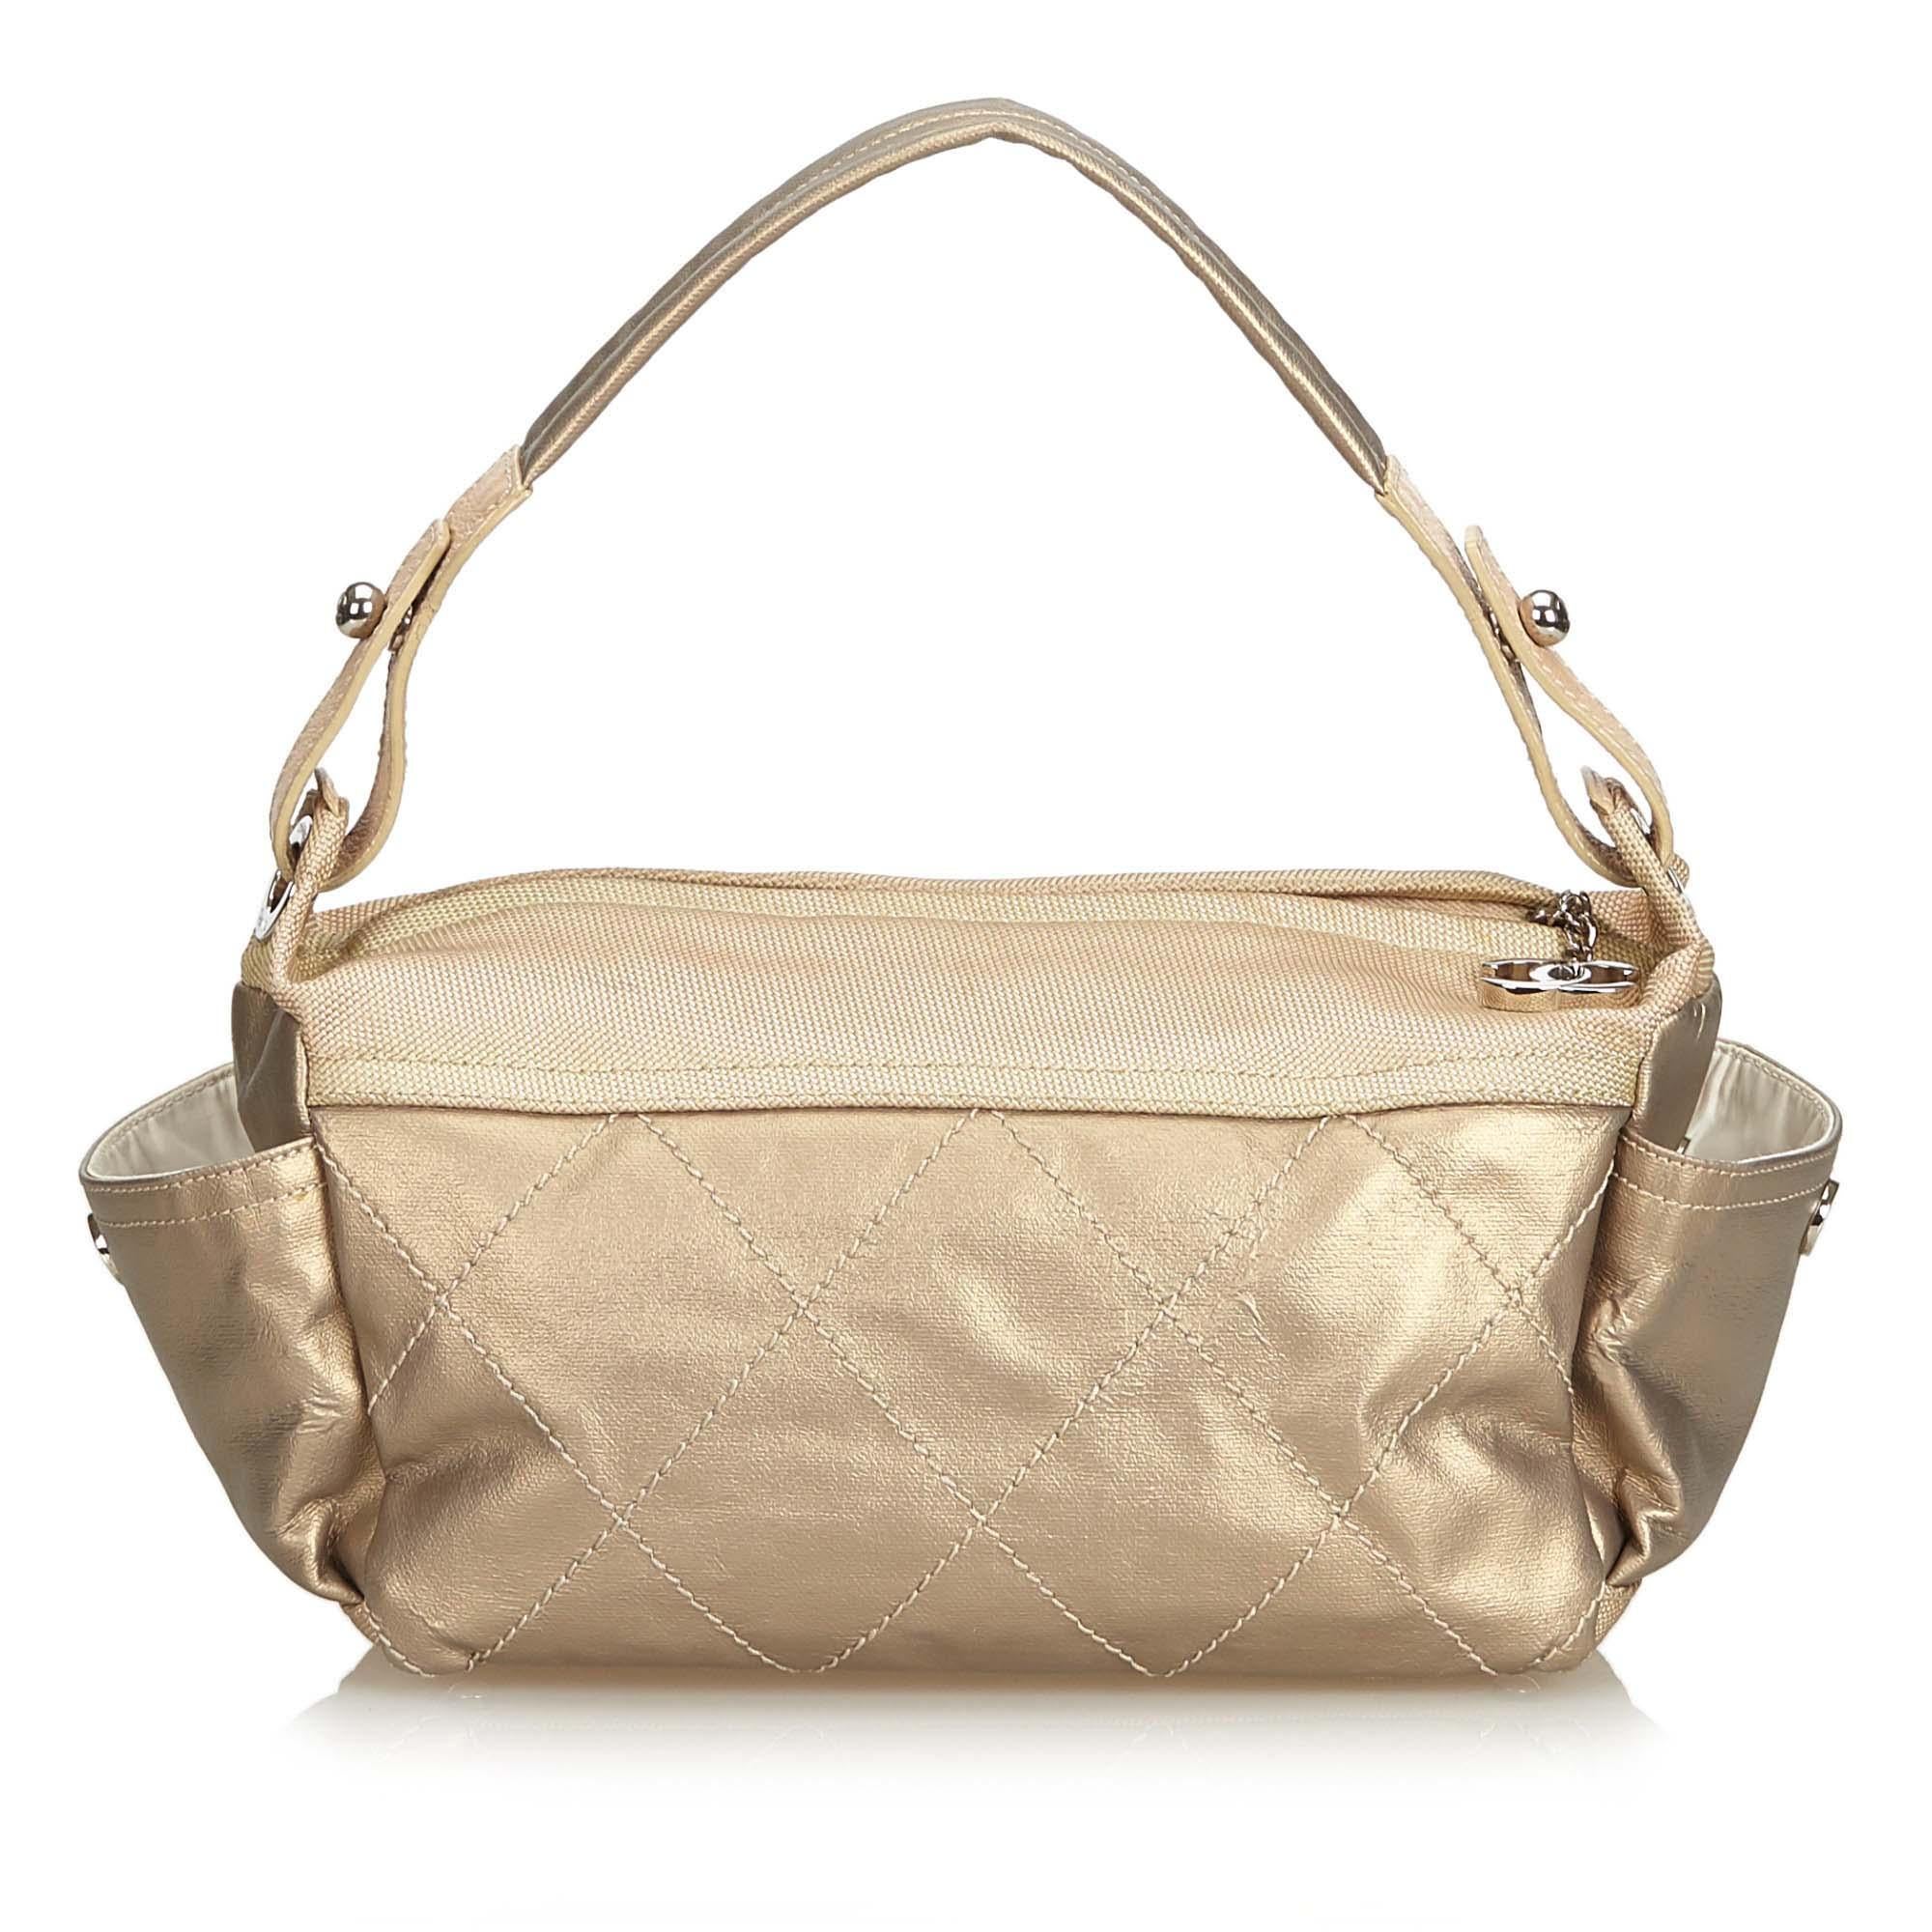 Chanel Gold Paris Biarritz Bag In Good Condition For Sale In Orlando, FL